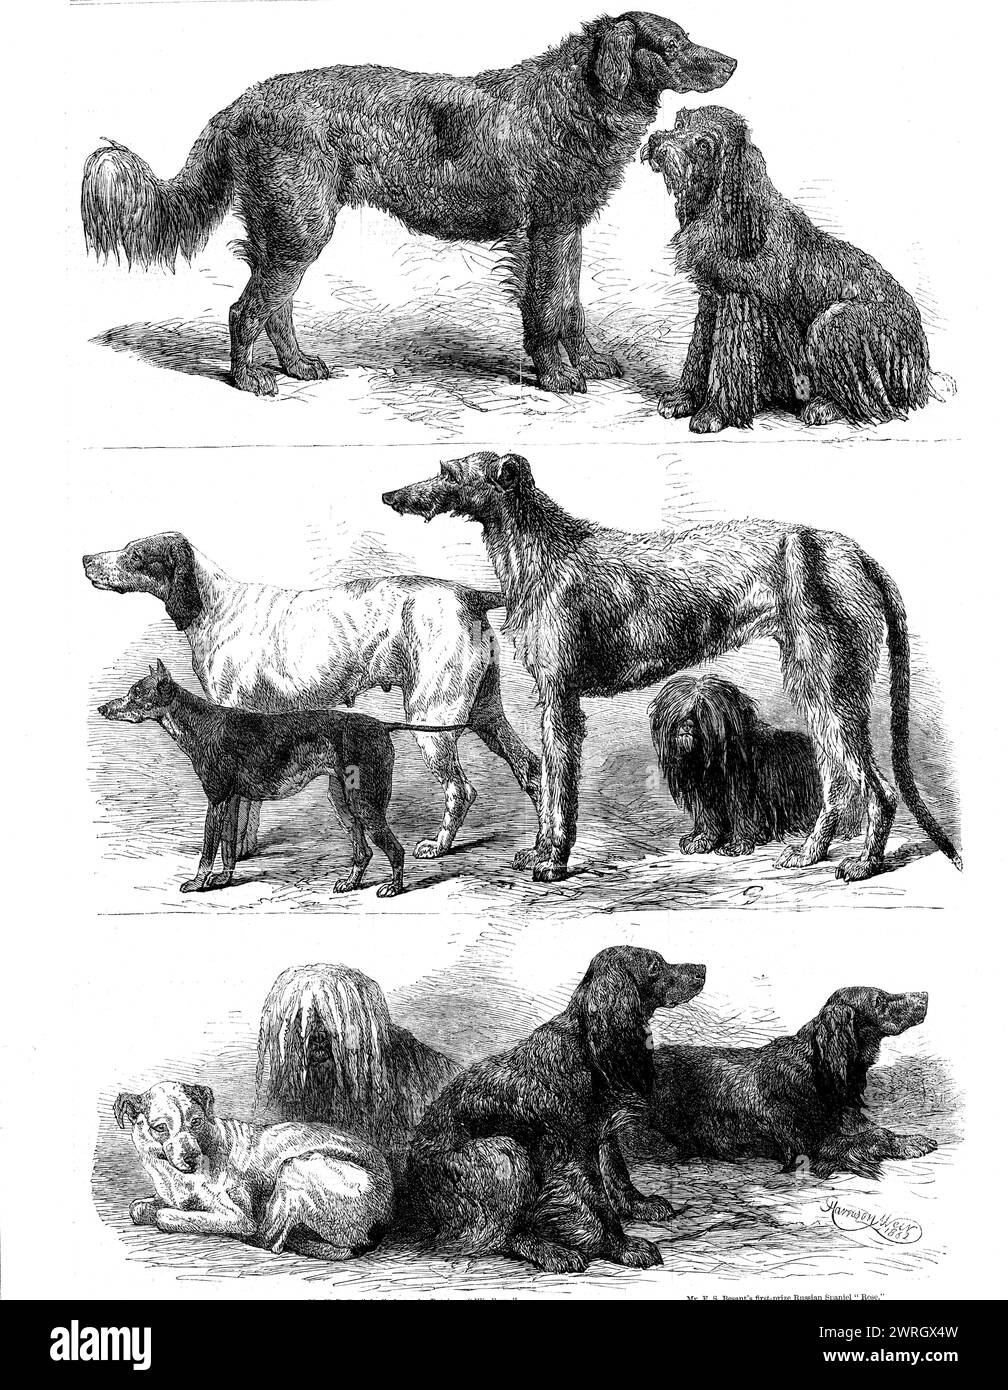 Prize dogs at the recent show, Birmingham, 1862. 'Mr. H. R. Brailsford's Windham, the first prize retriever in &quot;a class generally commended&quot;...; Mr. F. H. Besant's Russian spaniel Rose, the first prize taker in the extra class for any known breeds of foreign sporting dogs; she is very curiously ringletted...Mr. J. N. Beasley's Alder, the first-prize deerhound, is very grand in his hair, quality, and size; and his great peculiarity was his immense length of tail...The admirers of Skye terriers had no reason to complain of Mr. W. McDonald's winning Duchess, with her rich brown coat of Stock Photo